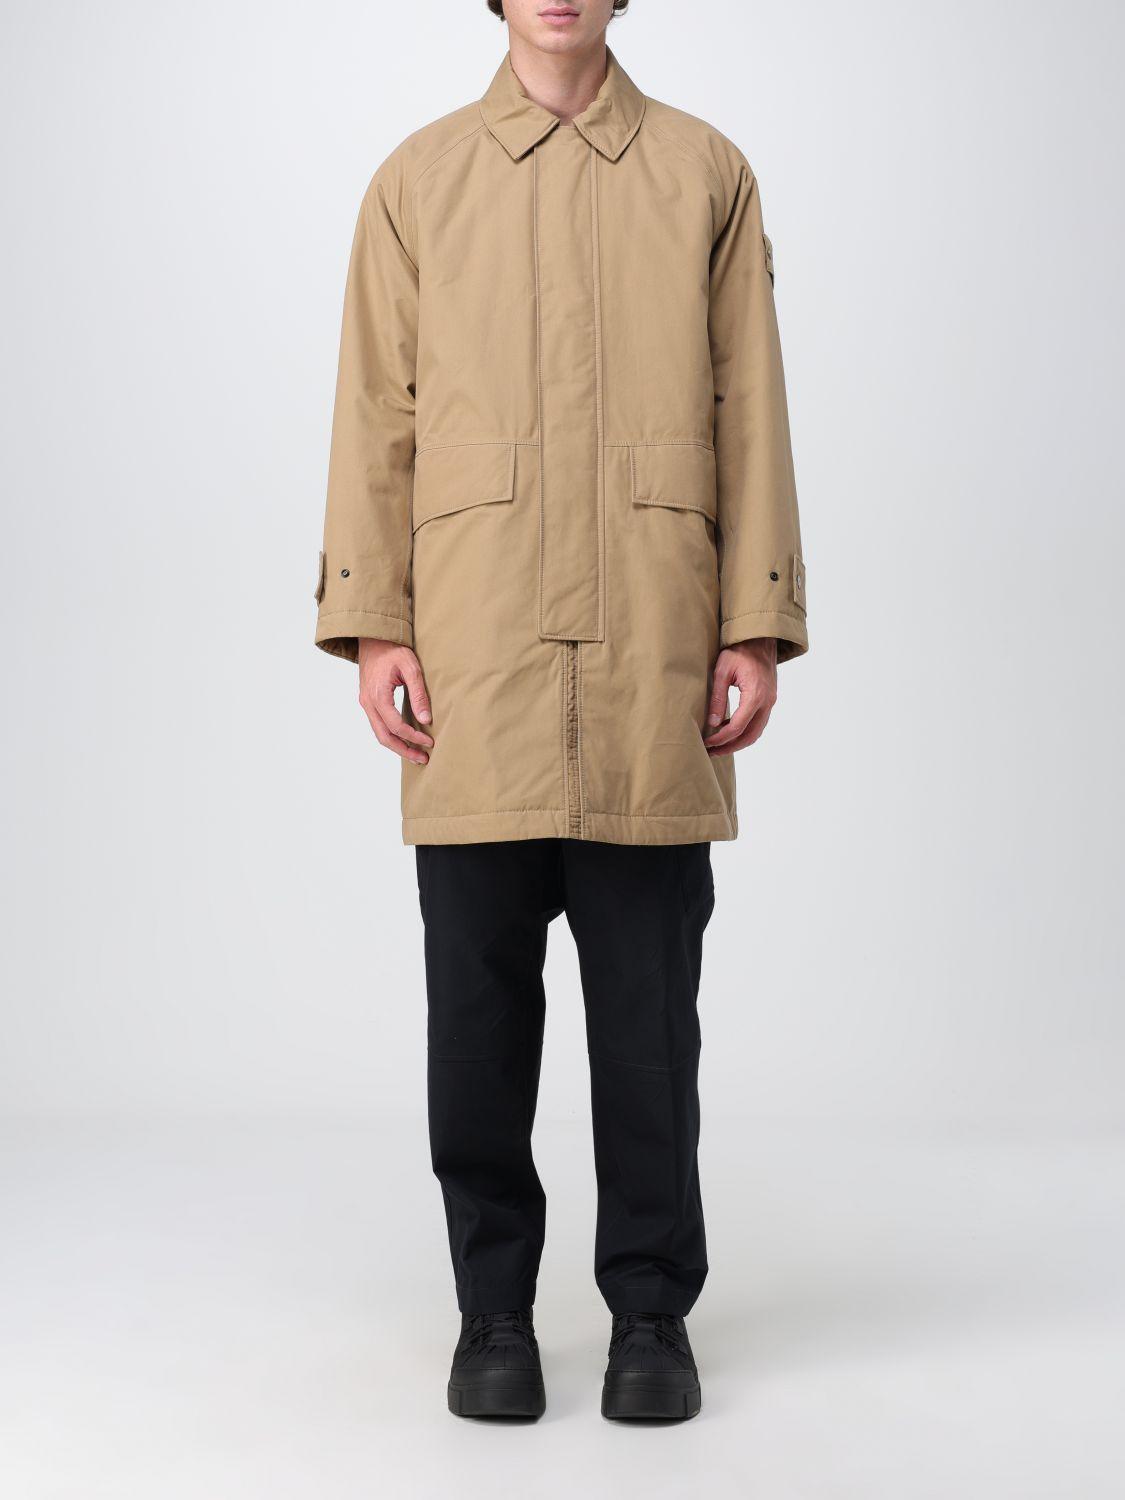 Stone Island Trench Coat in Natural for Men | Lyst